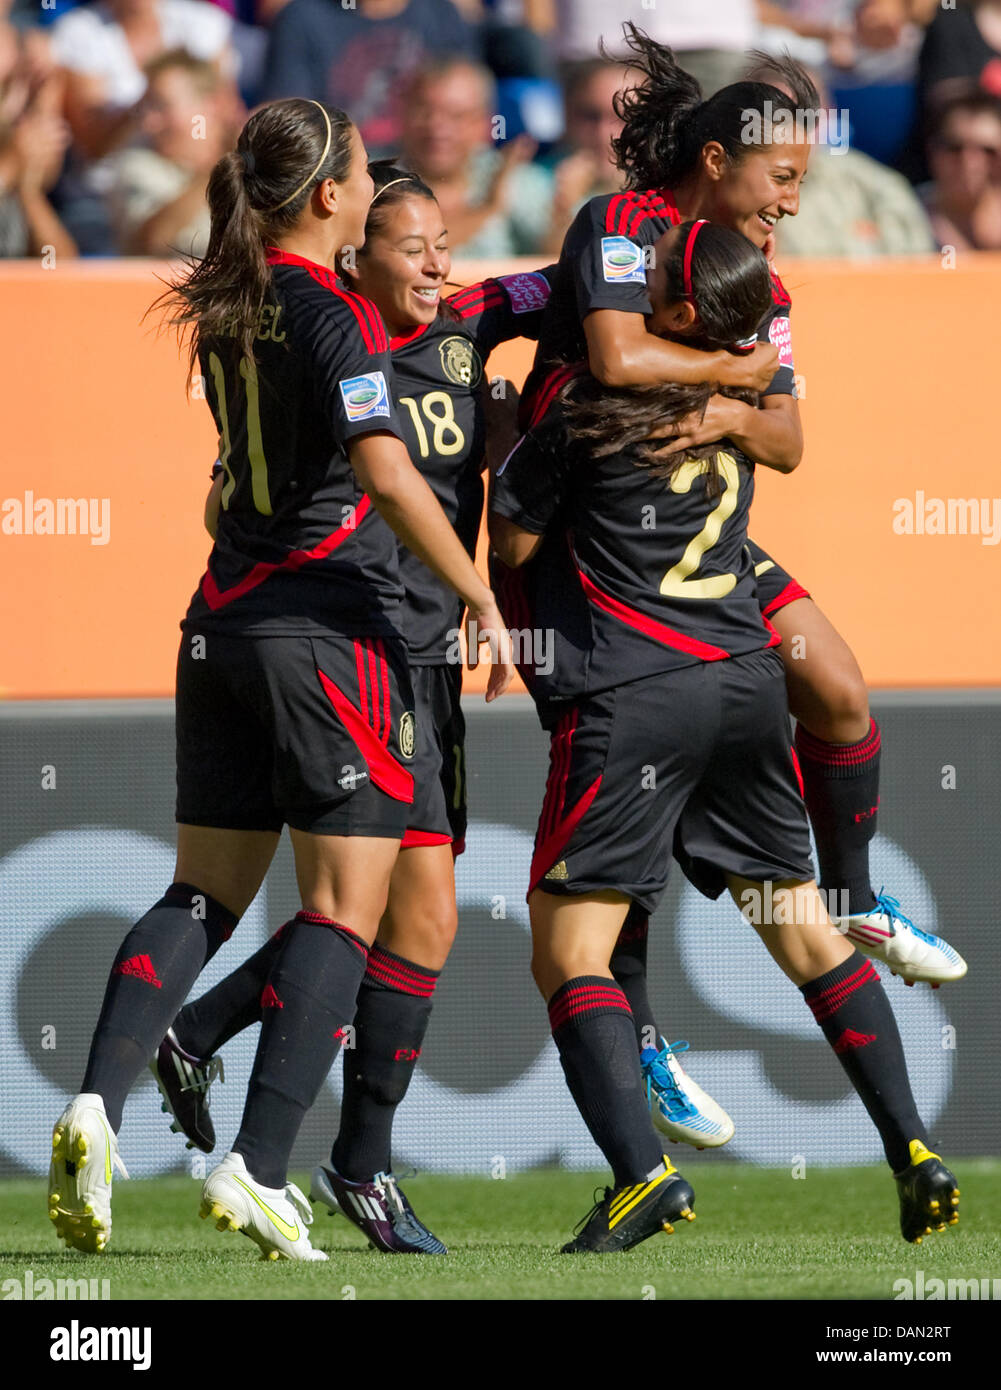 Stephany Mayor (r) of Mexico celebrates her 0-1 goal during the Group B match New Zealand against Mexico of FIFA Women's World Cup soccer tournament at the Rhein Neckar Arena in Sinsheim, Germany, 05 July 2011. Foto: Uwe Anspach dpa/lsw/lrs  +++(c) dpa - Bildfunk+++ Stock Photo